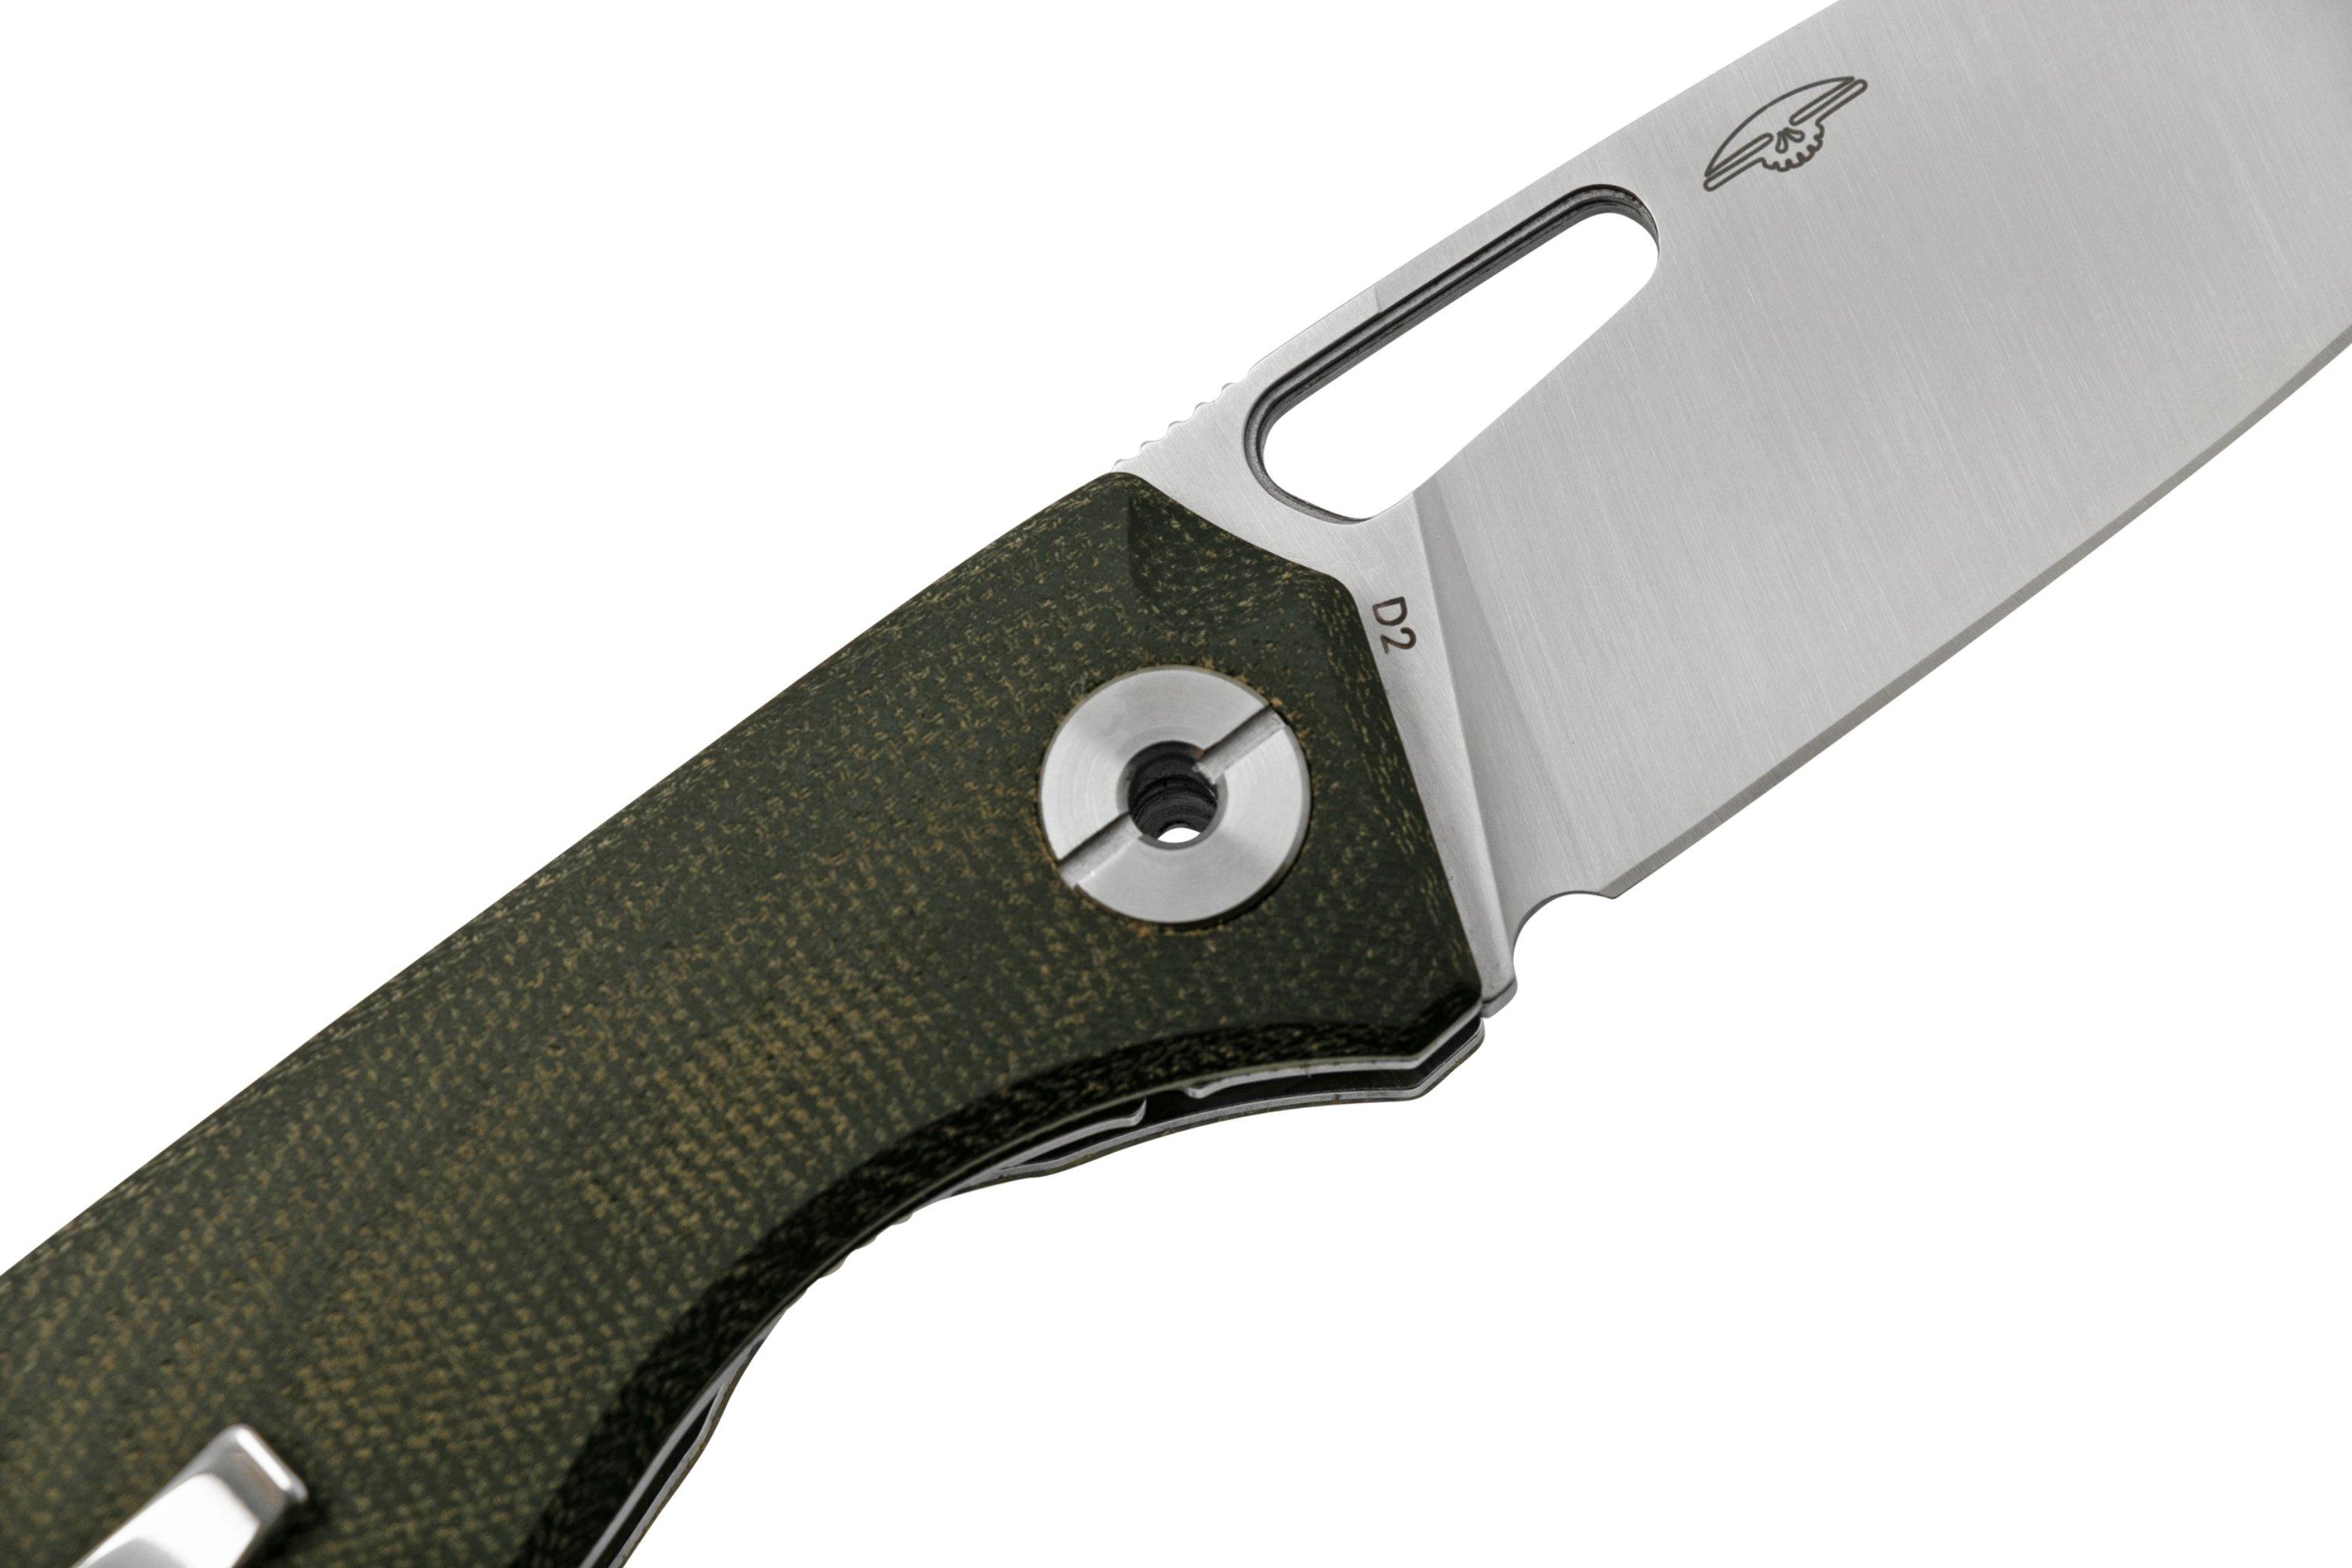 Sidus Free Micarta Pocket Knife-Real Steel, Knives \ Pocket Knives \ Real  Steel , Army Navy Surplus - Tactical, Big variety -  Cheap prices